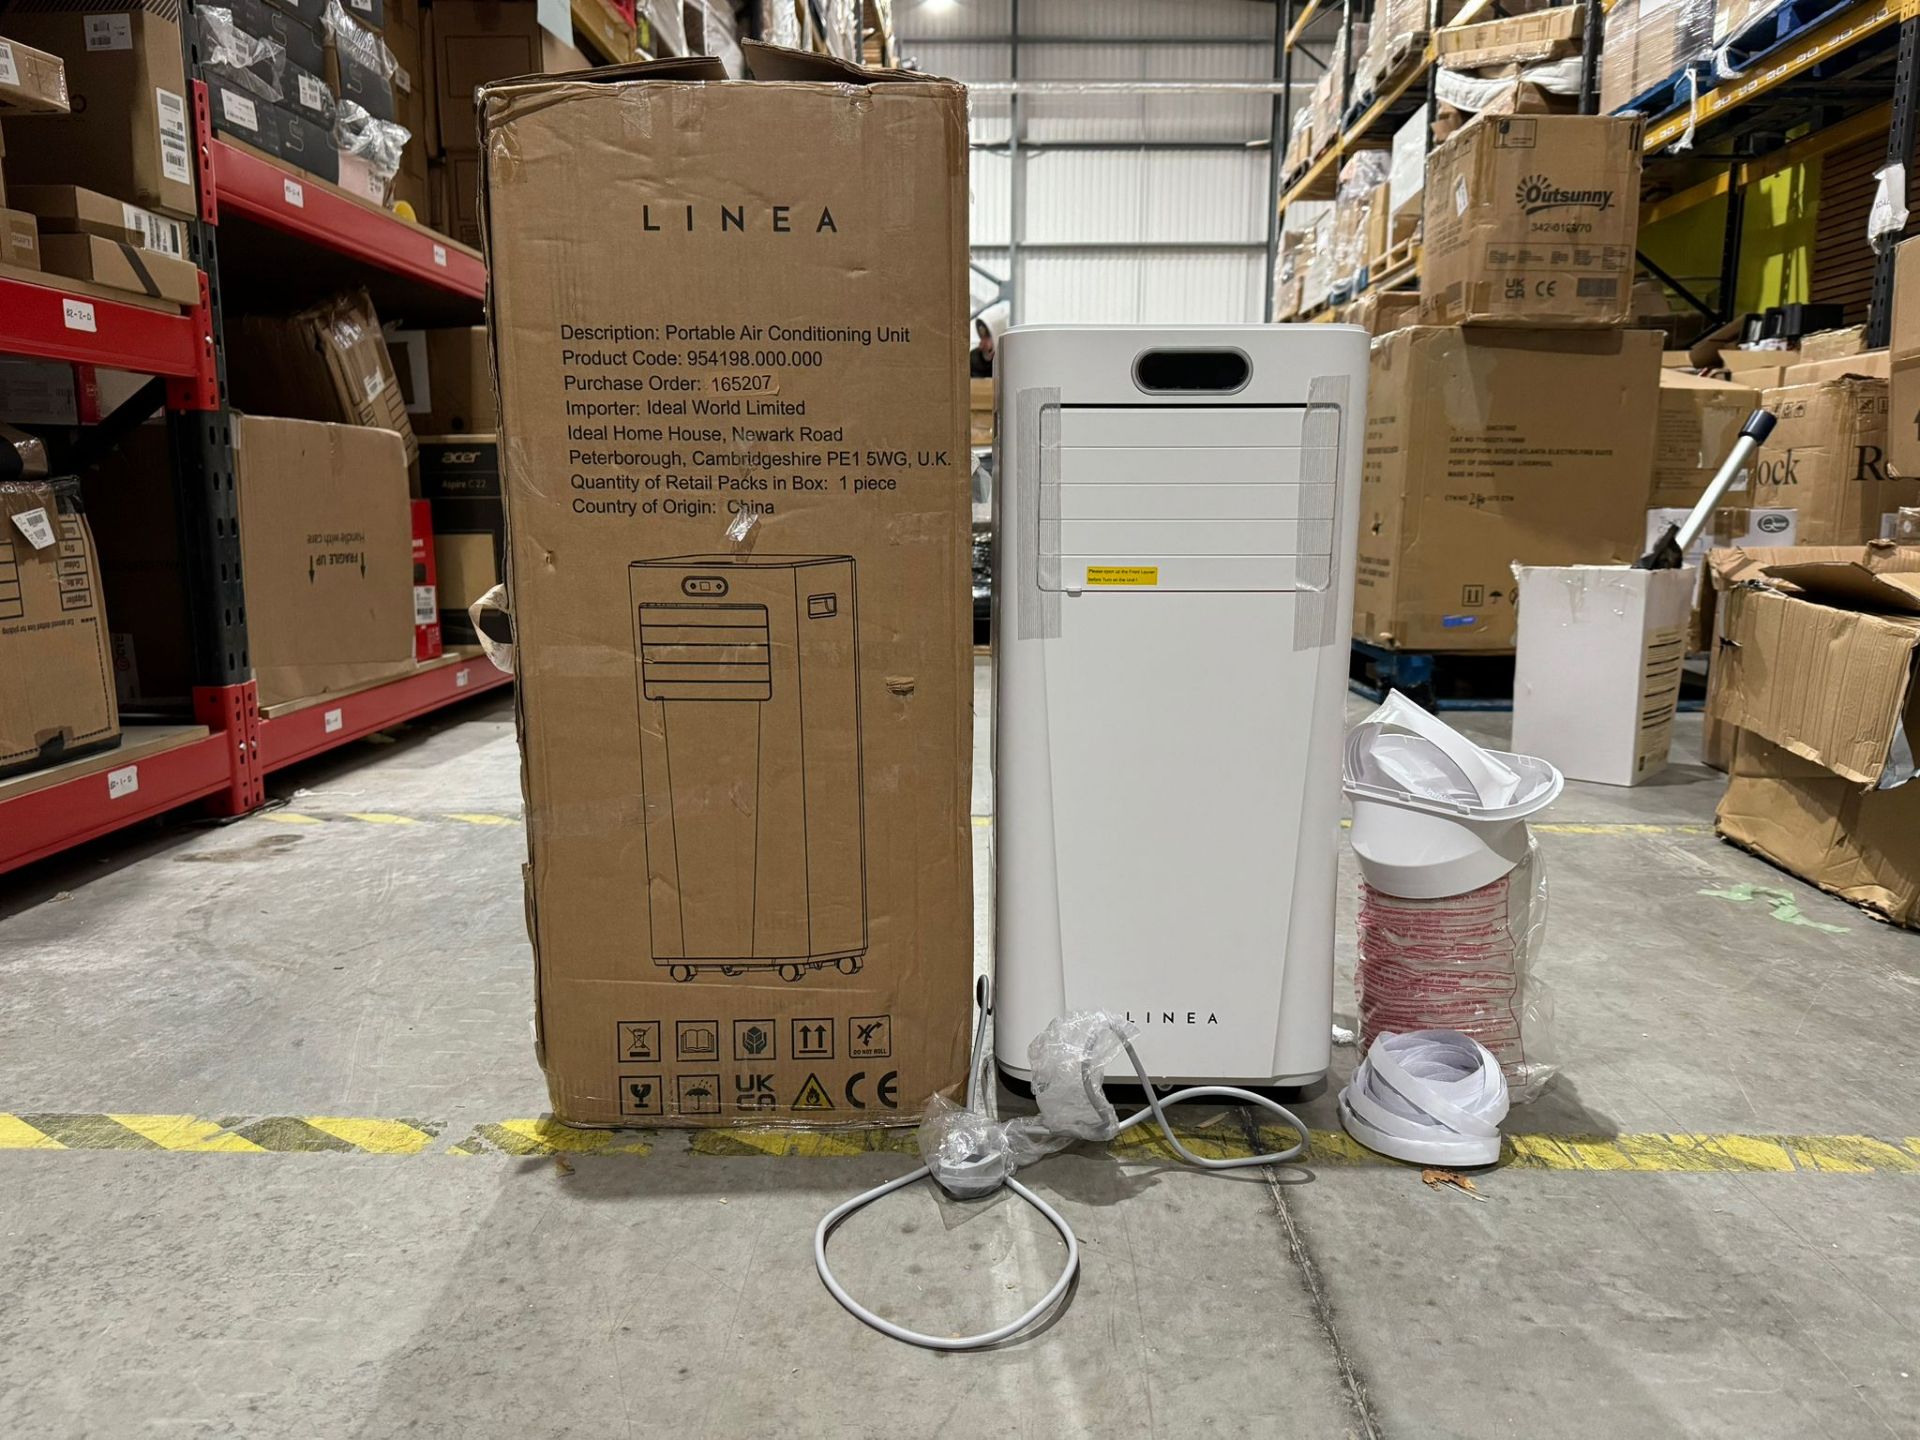 1 x LINEA Portable Air Conditioning Unit - 954198.000.000 with Window Kit - NO RESERVE - Image 6 of 8